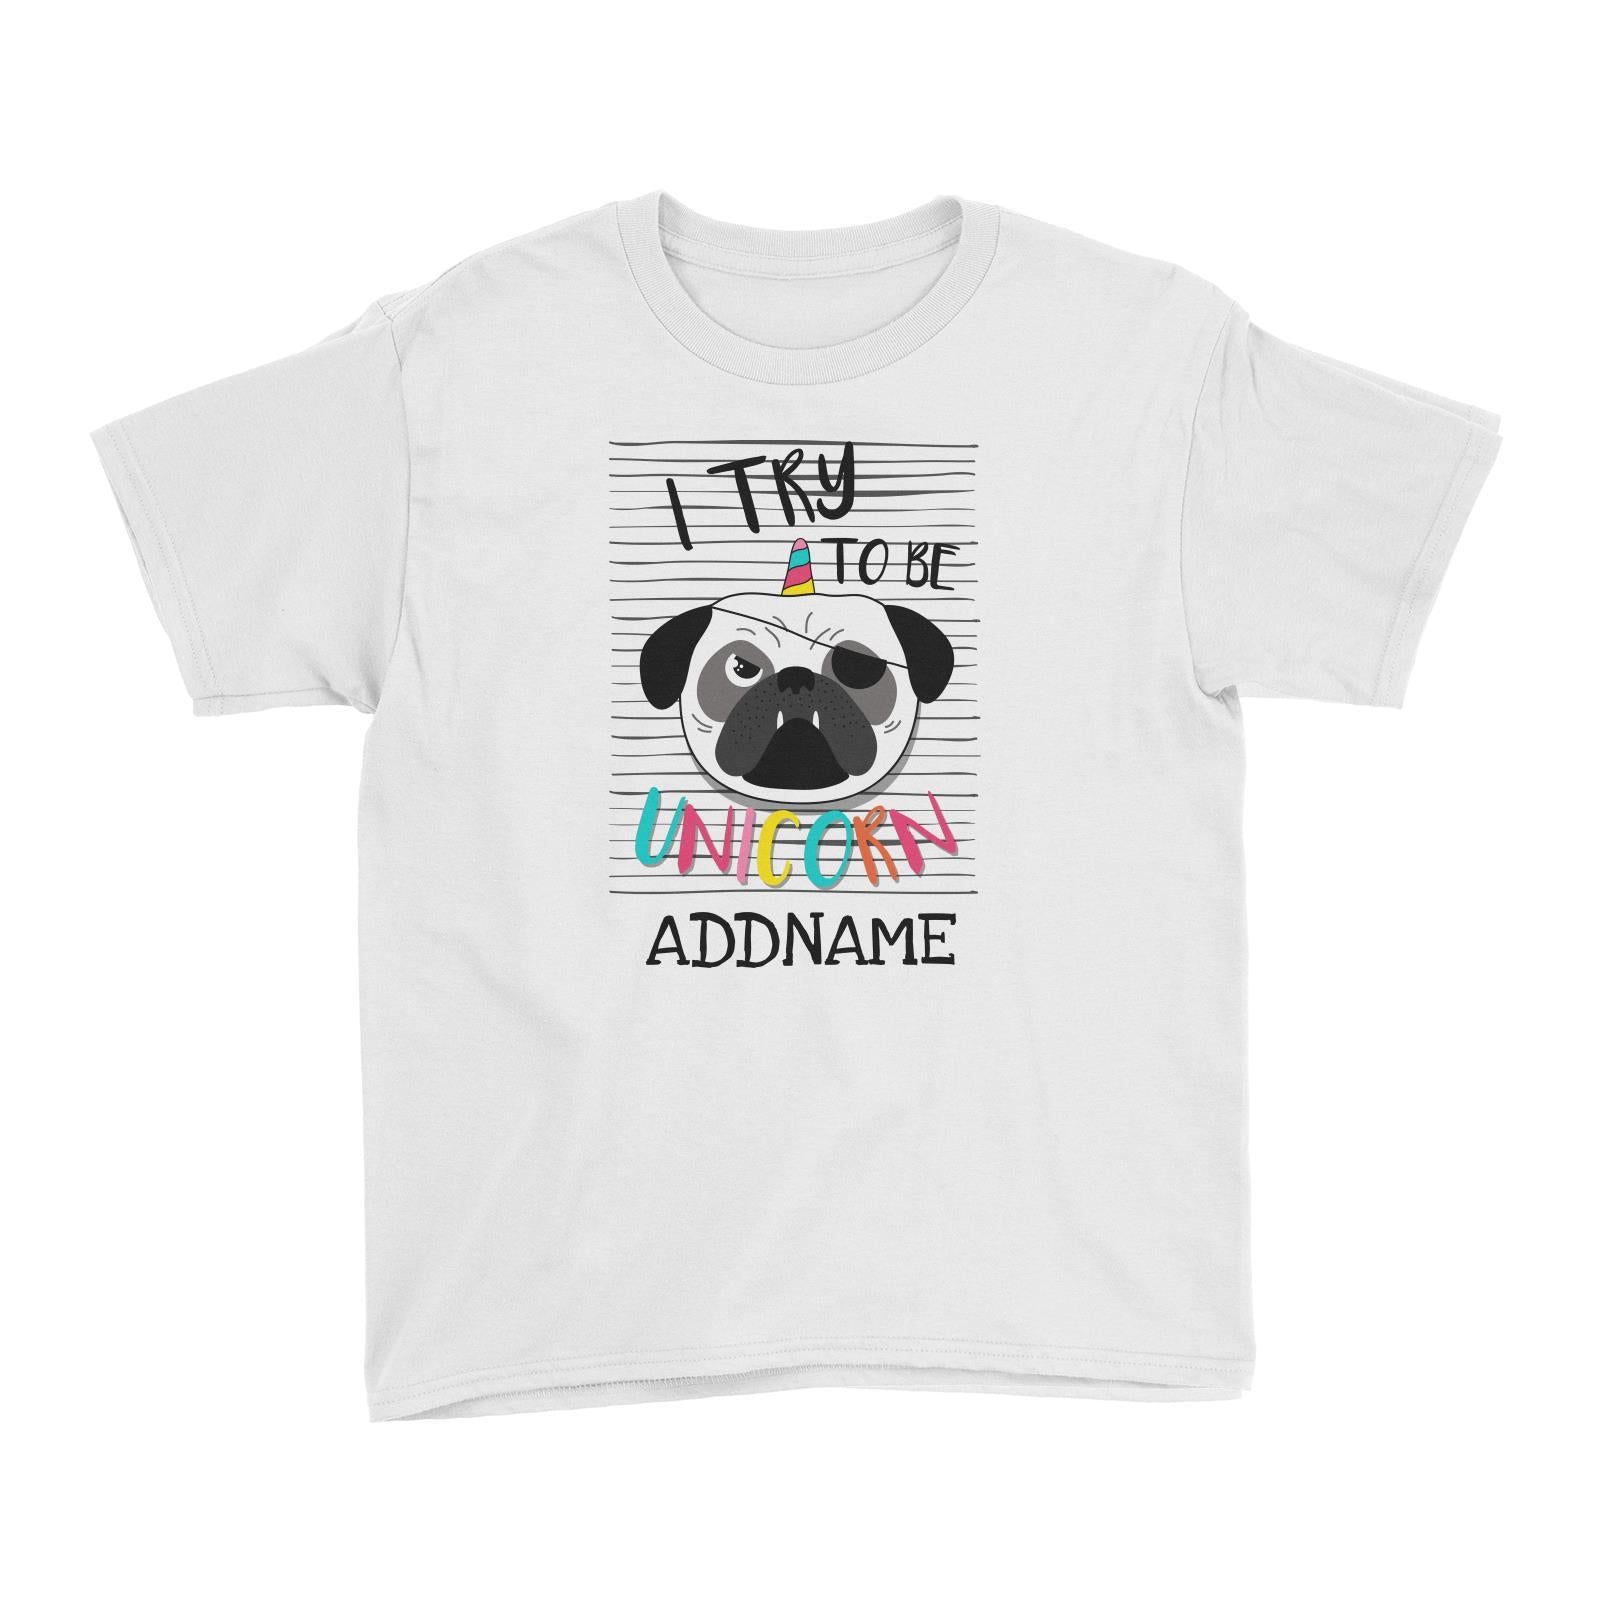 I Try to Be Unicorn Pug Addname Kid's T-Shirt